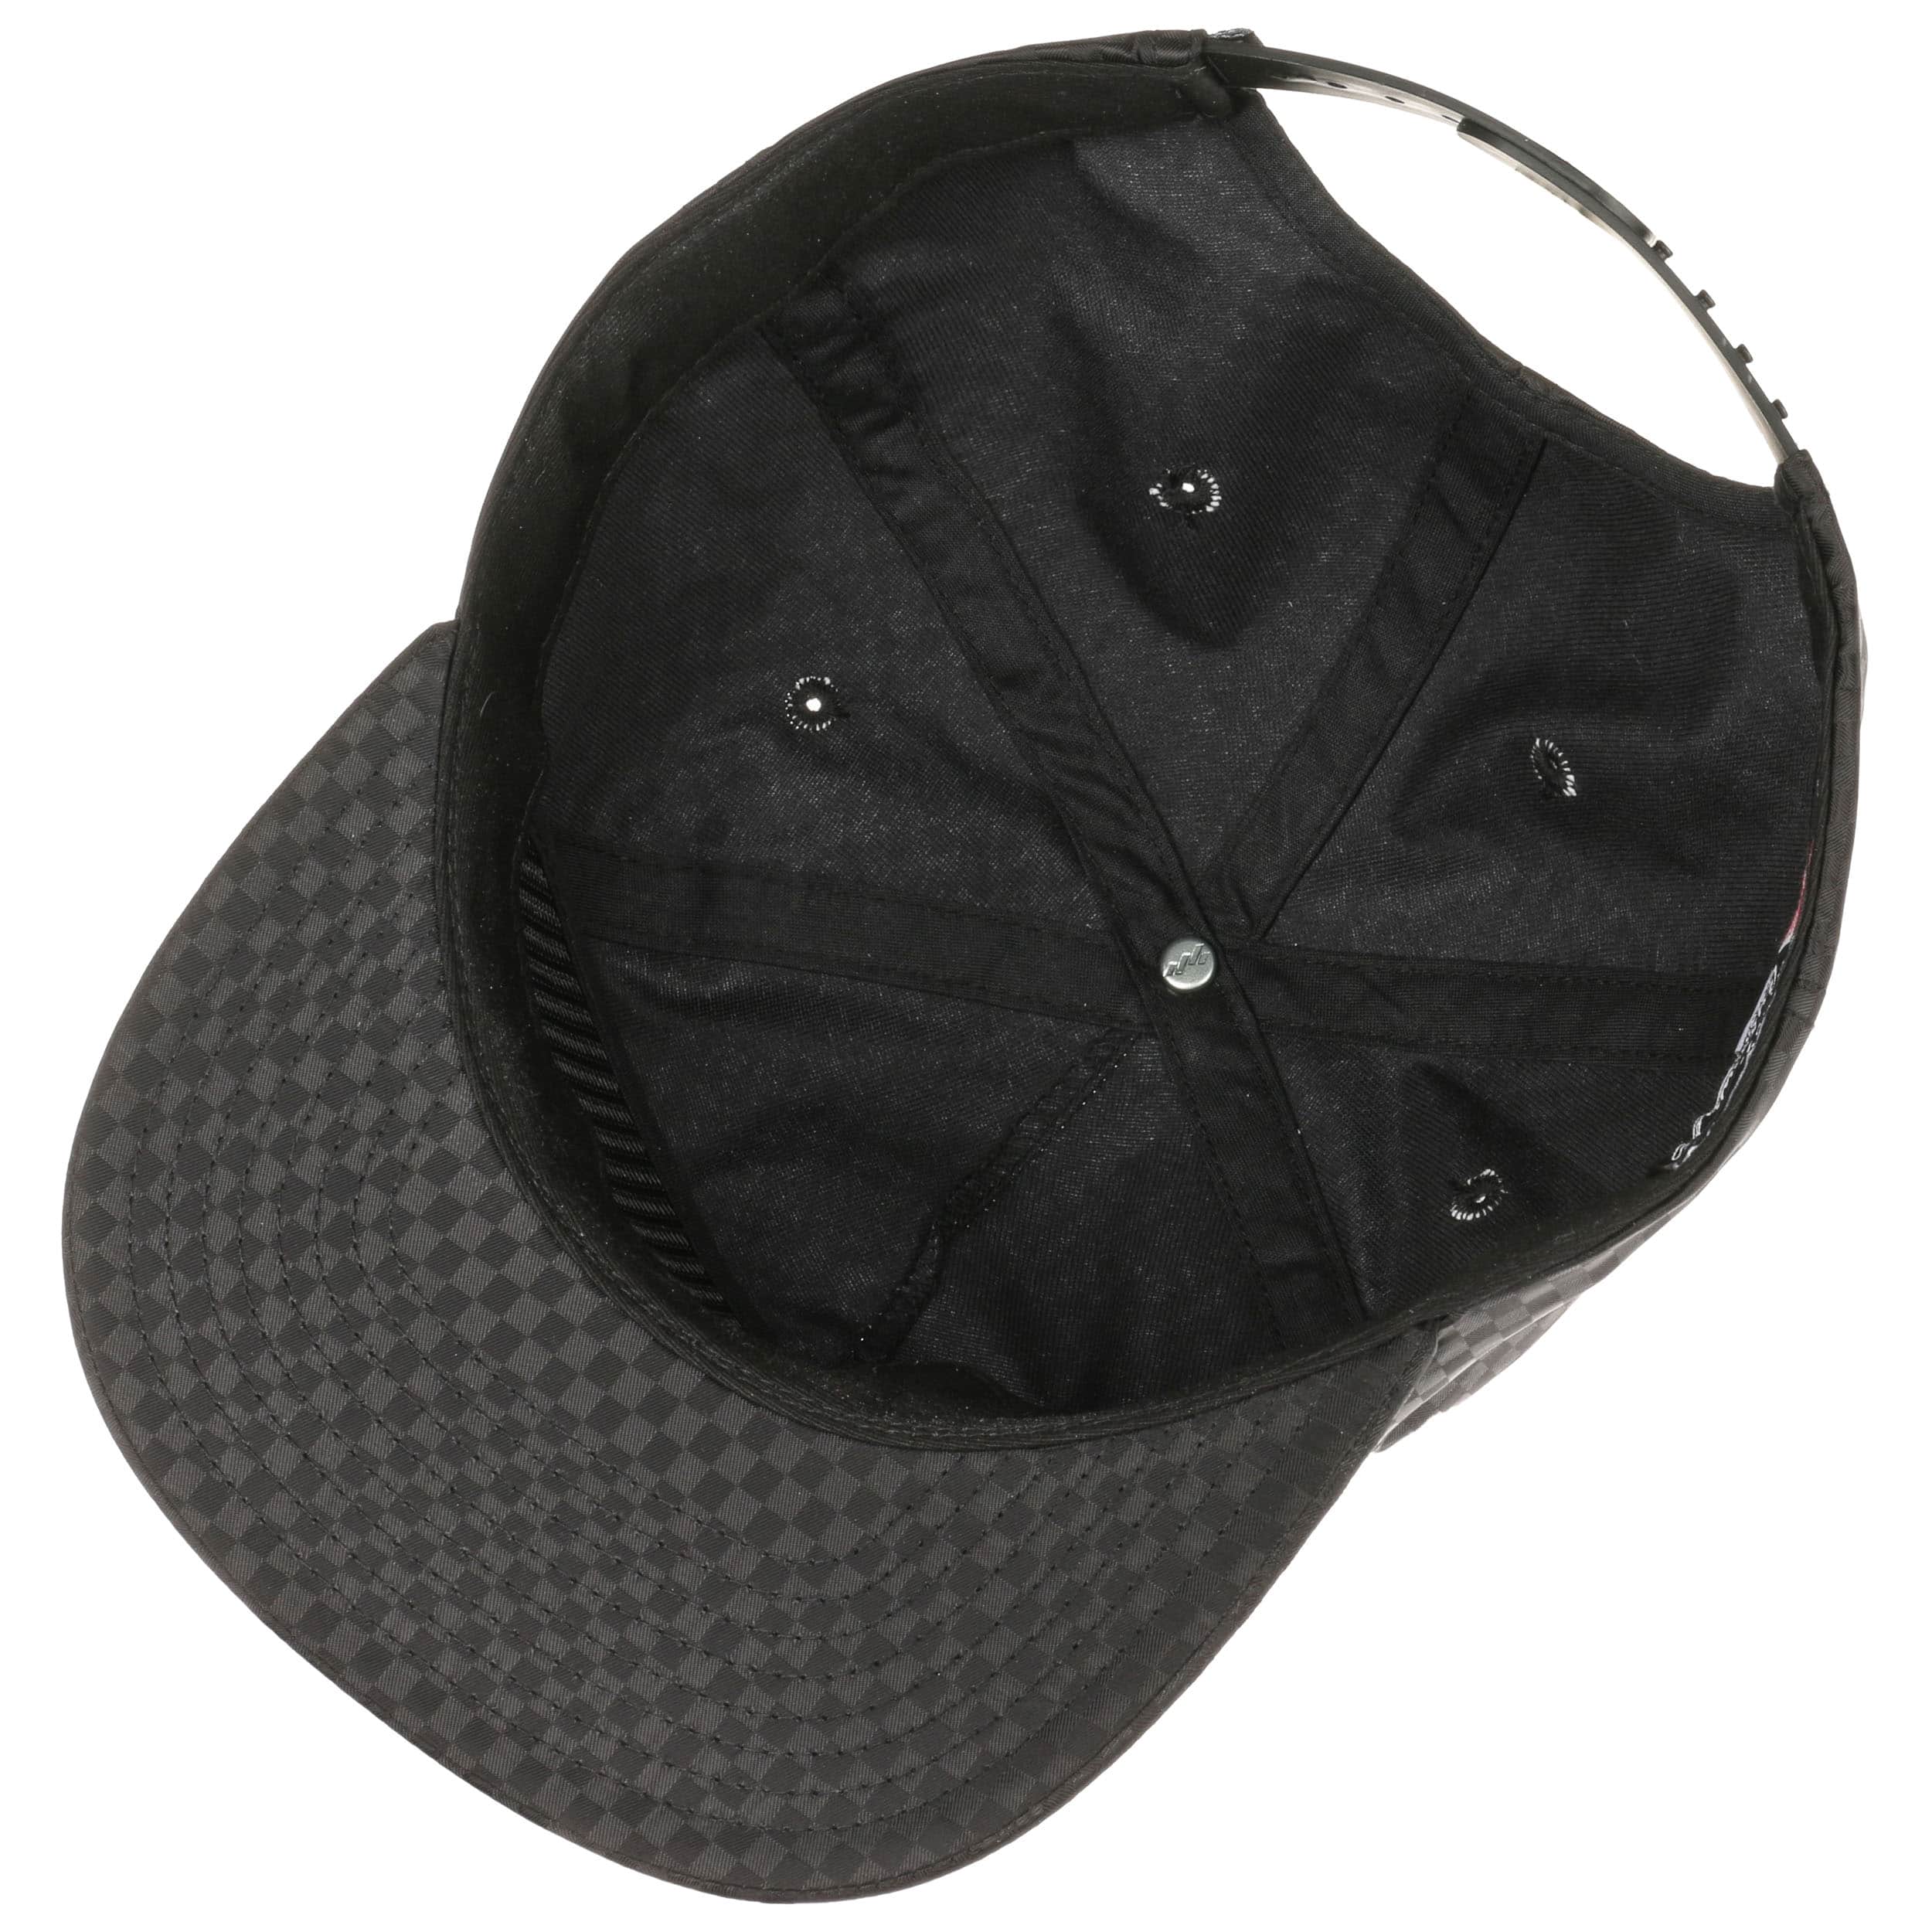 Check Snapback Cap by HUF --> Shop Hats, Beanies & Caps online Hatshopping